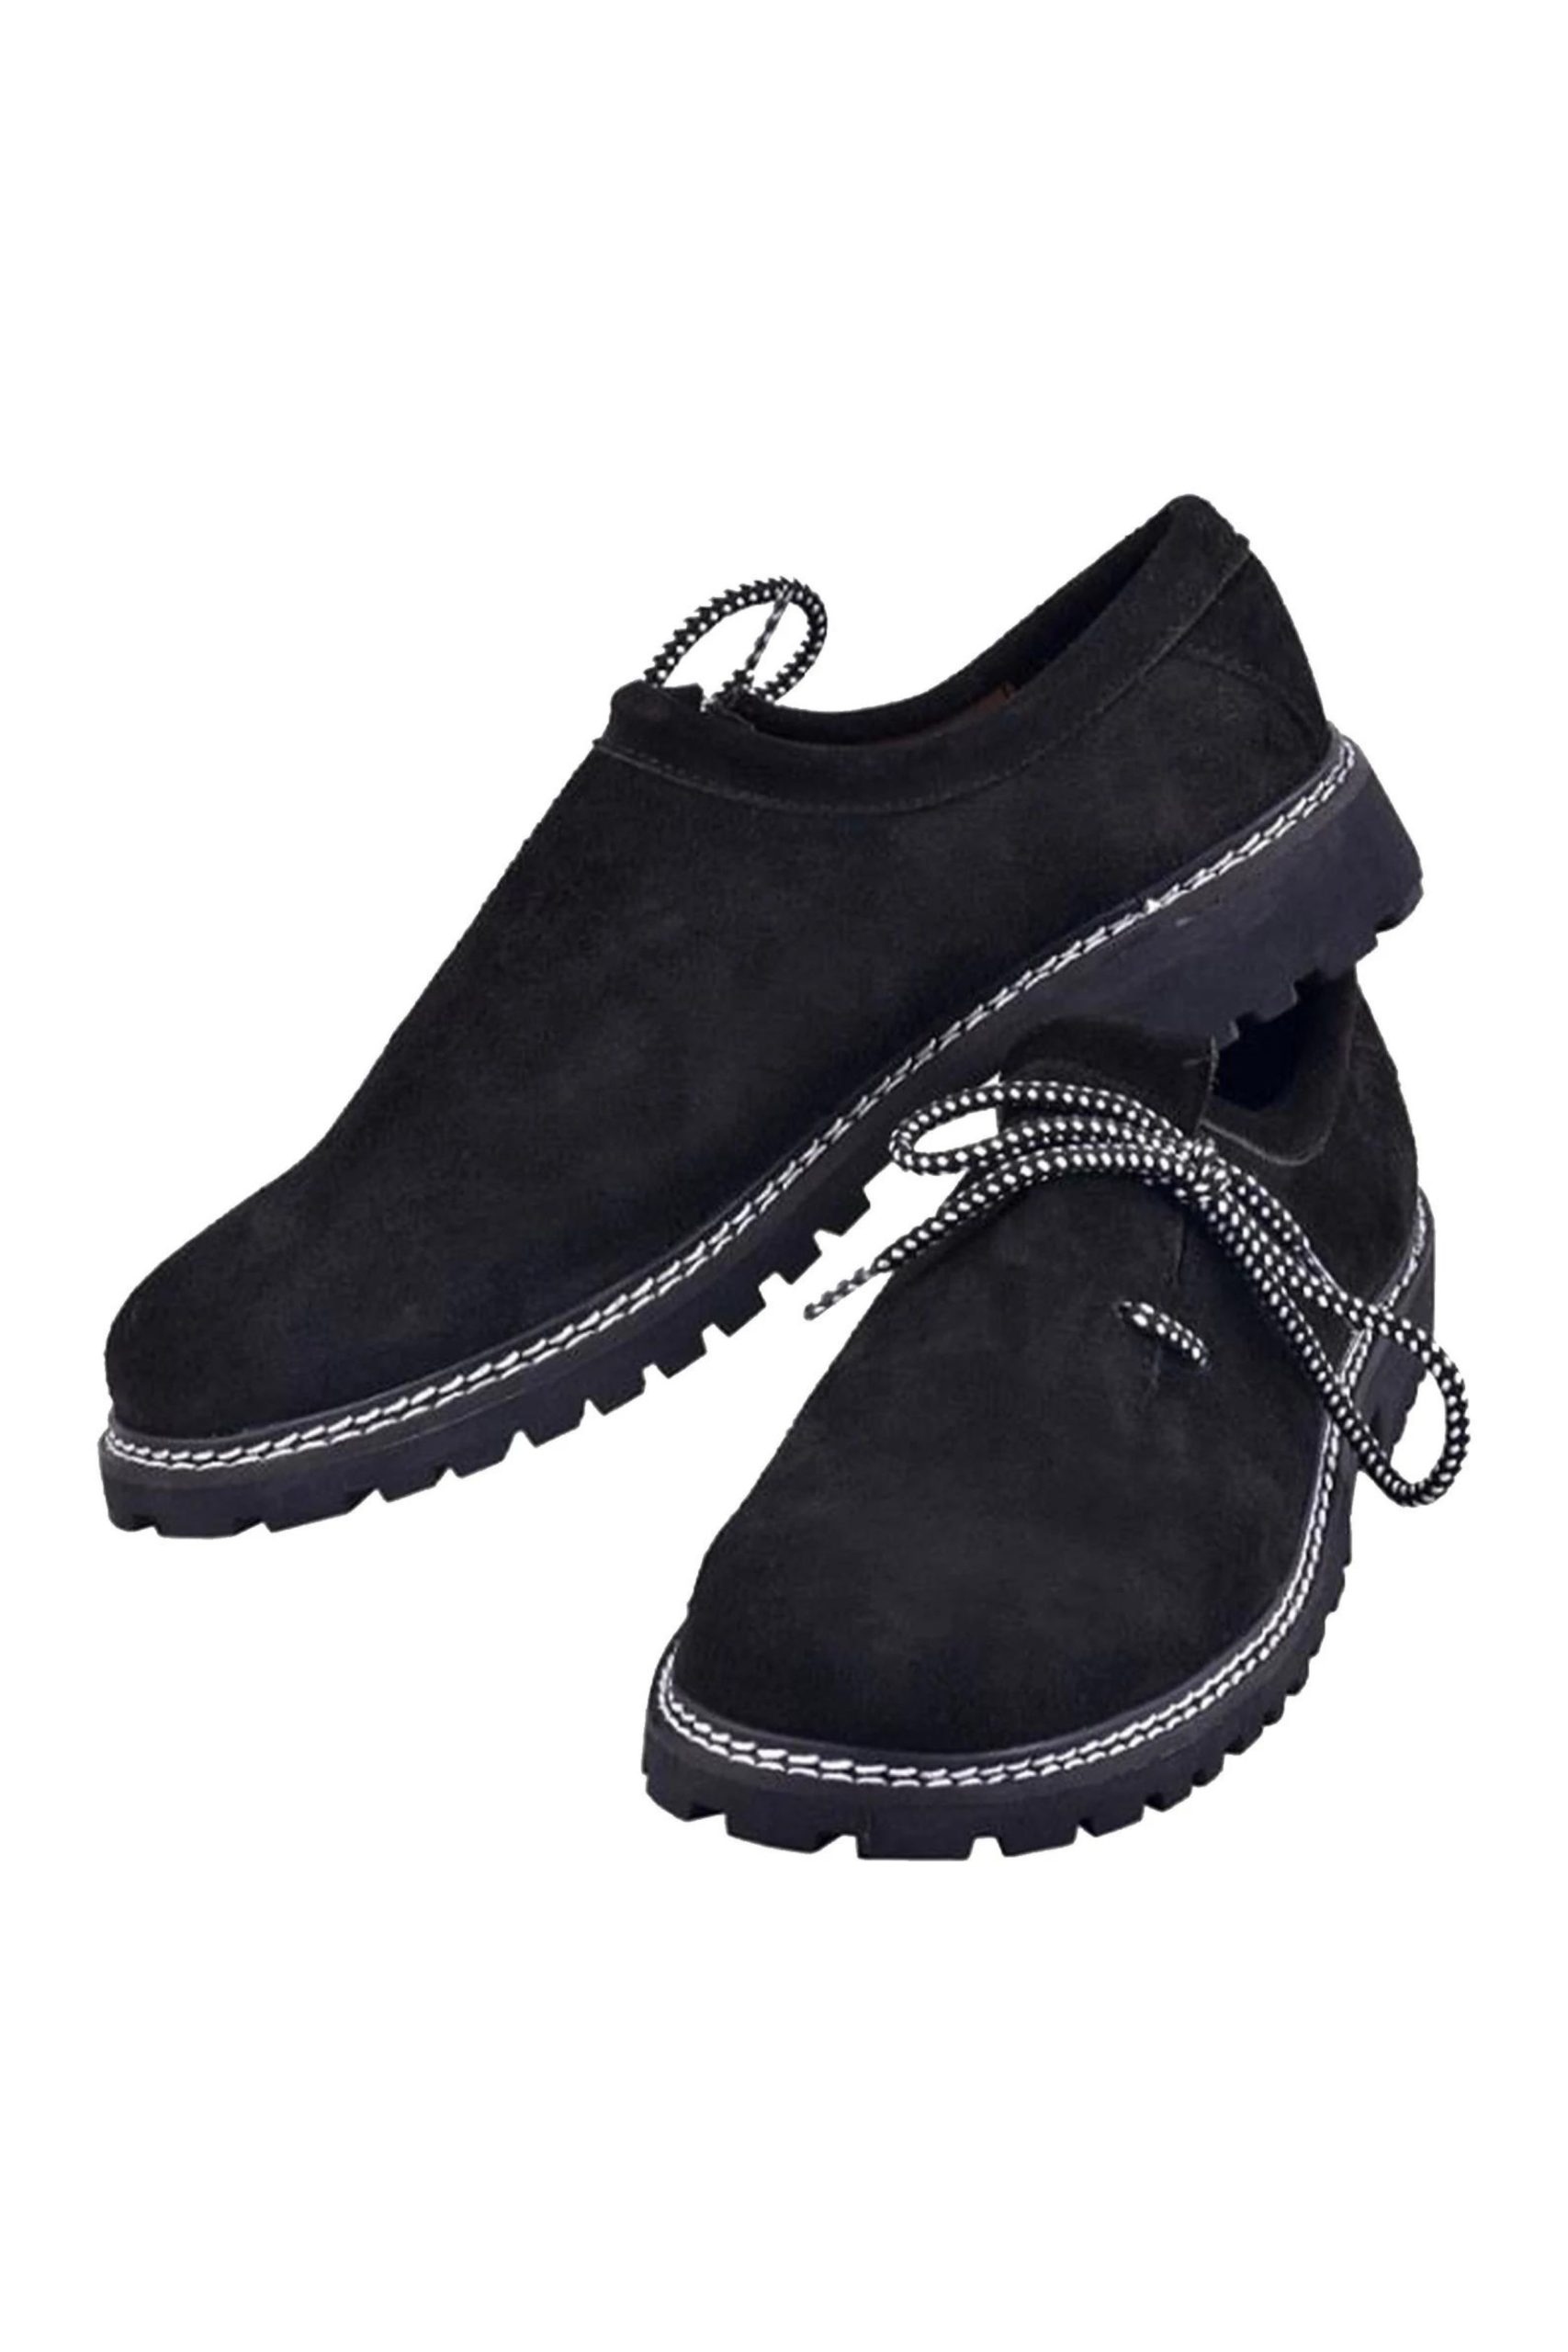 Niclas Lederhosen Shoes in black, showcasing the side and top view with distinctive patterned laces and a sturdy design